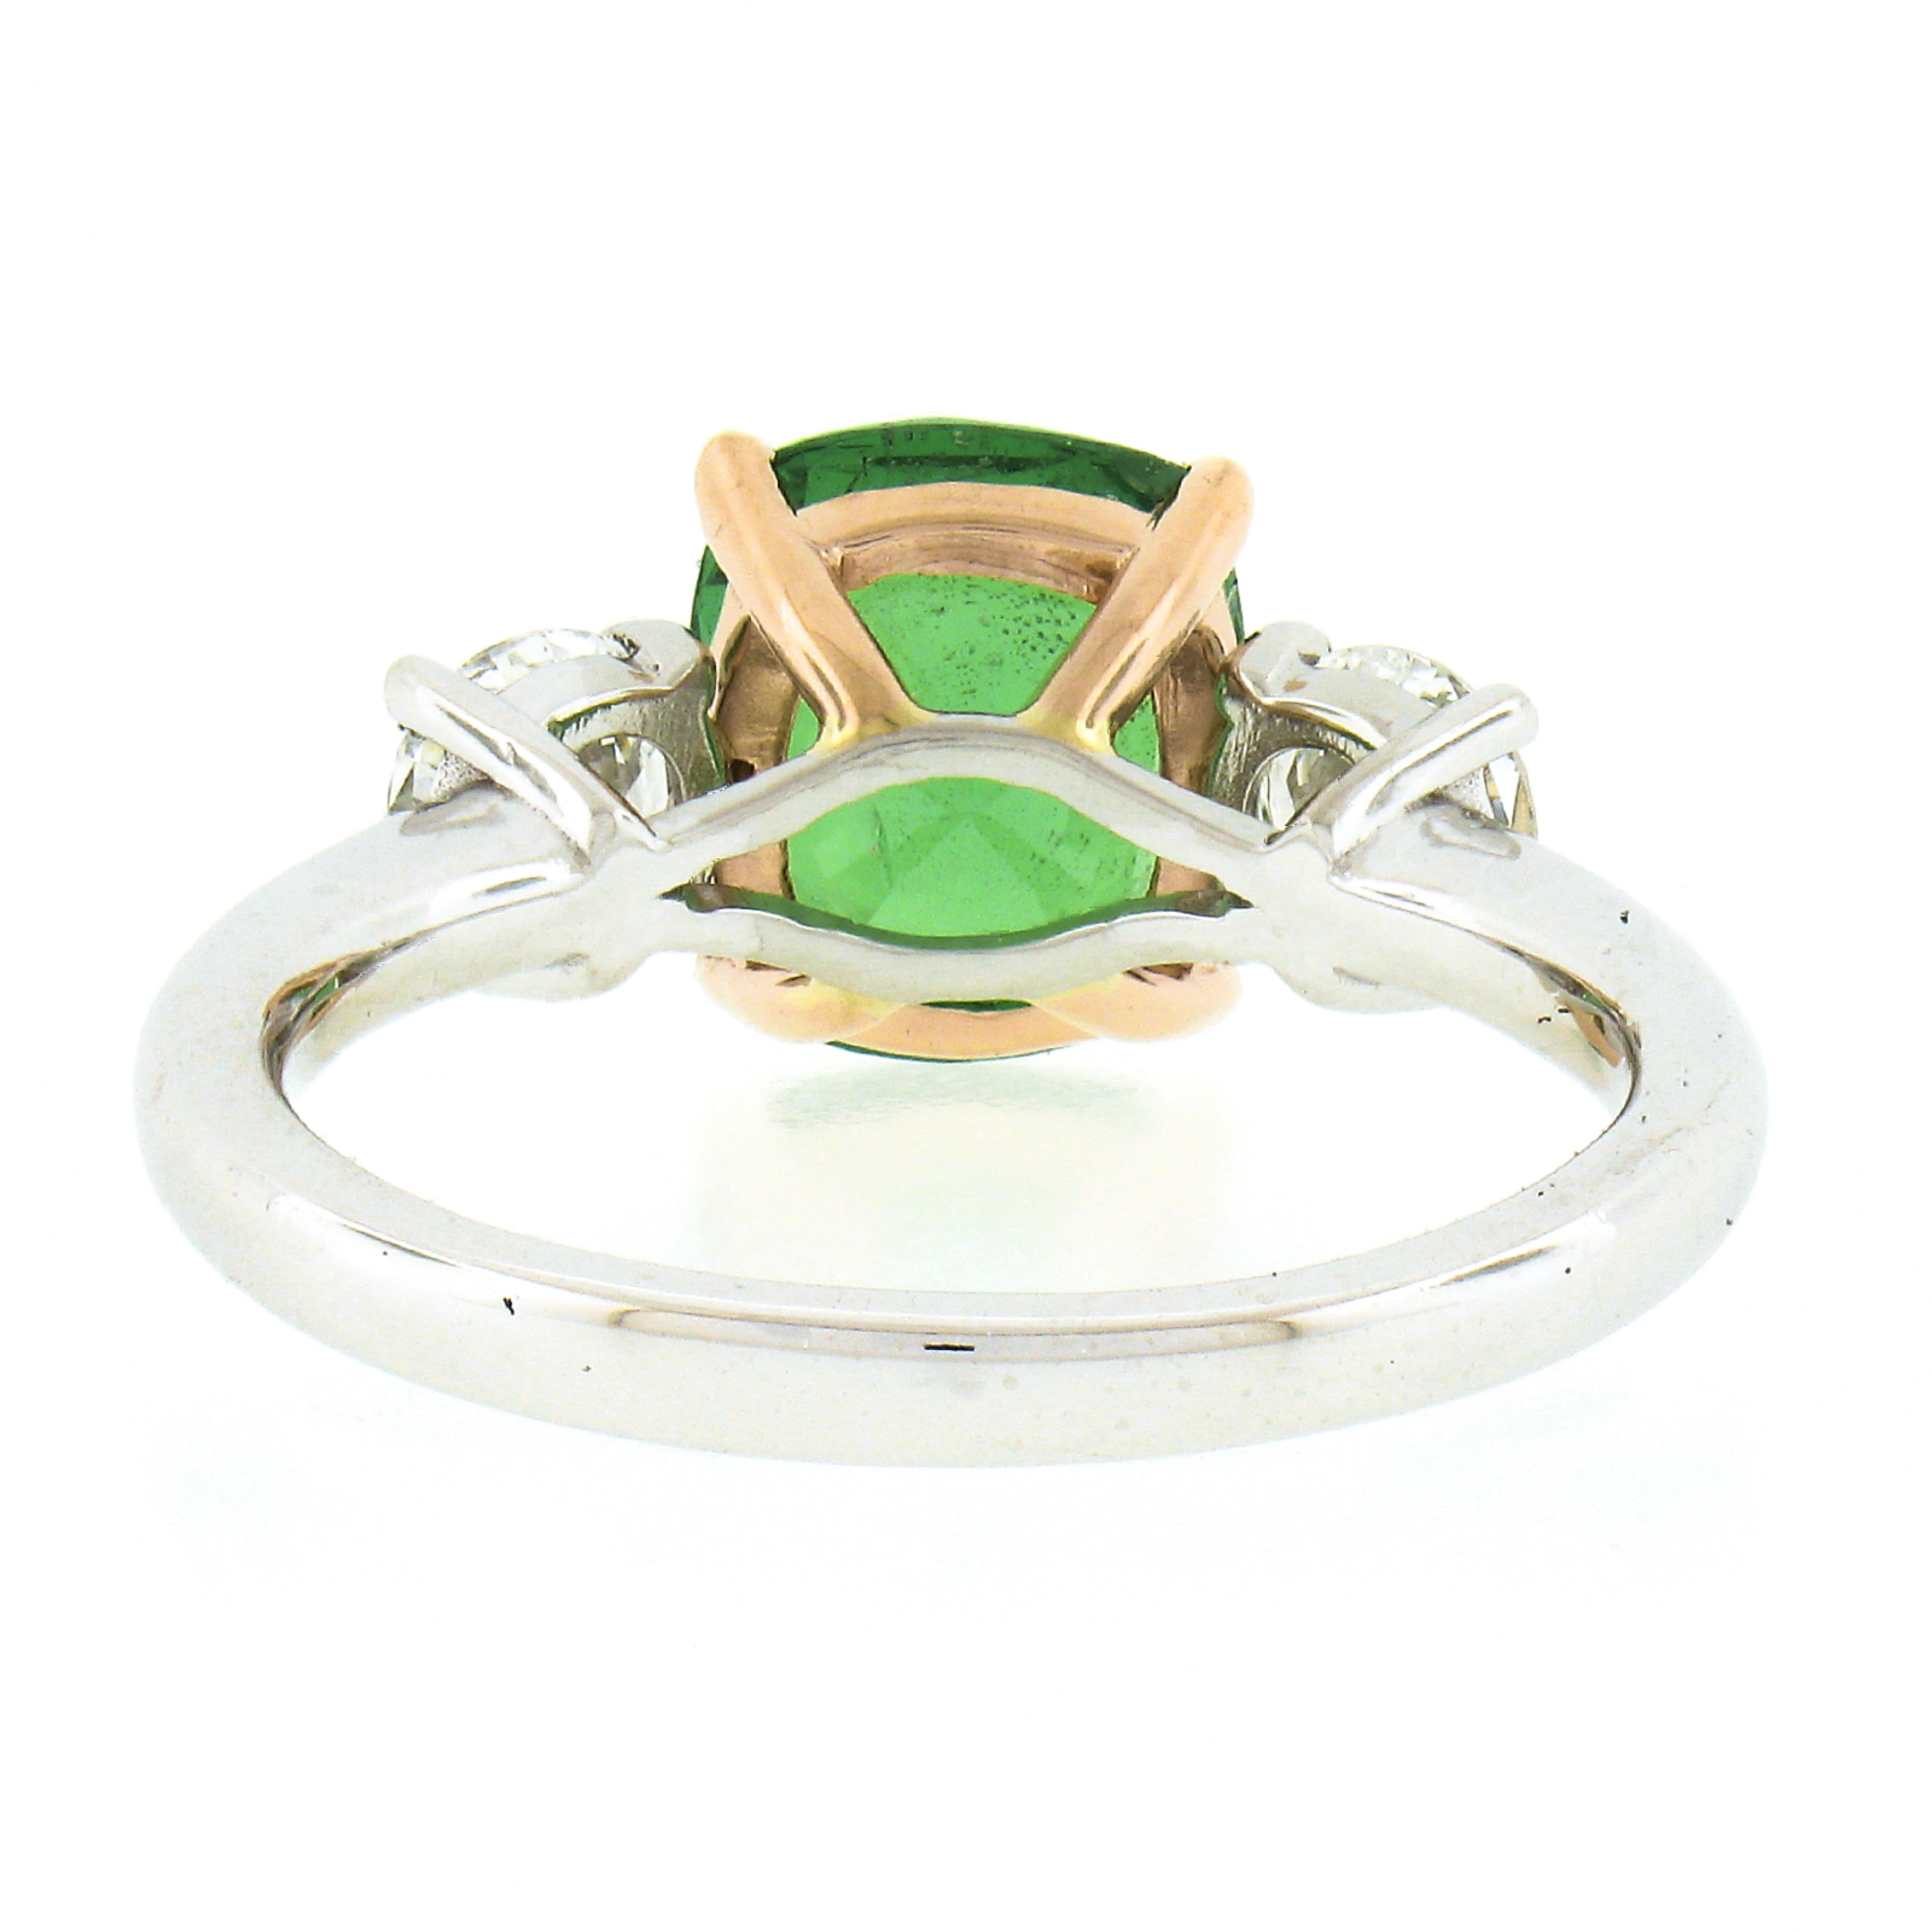 New Platinum 14k Gold 4.23ctw GIA Cushion Tsavorite & Round Diamond Accents Ring For Sale 1